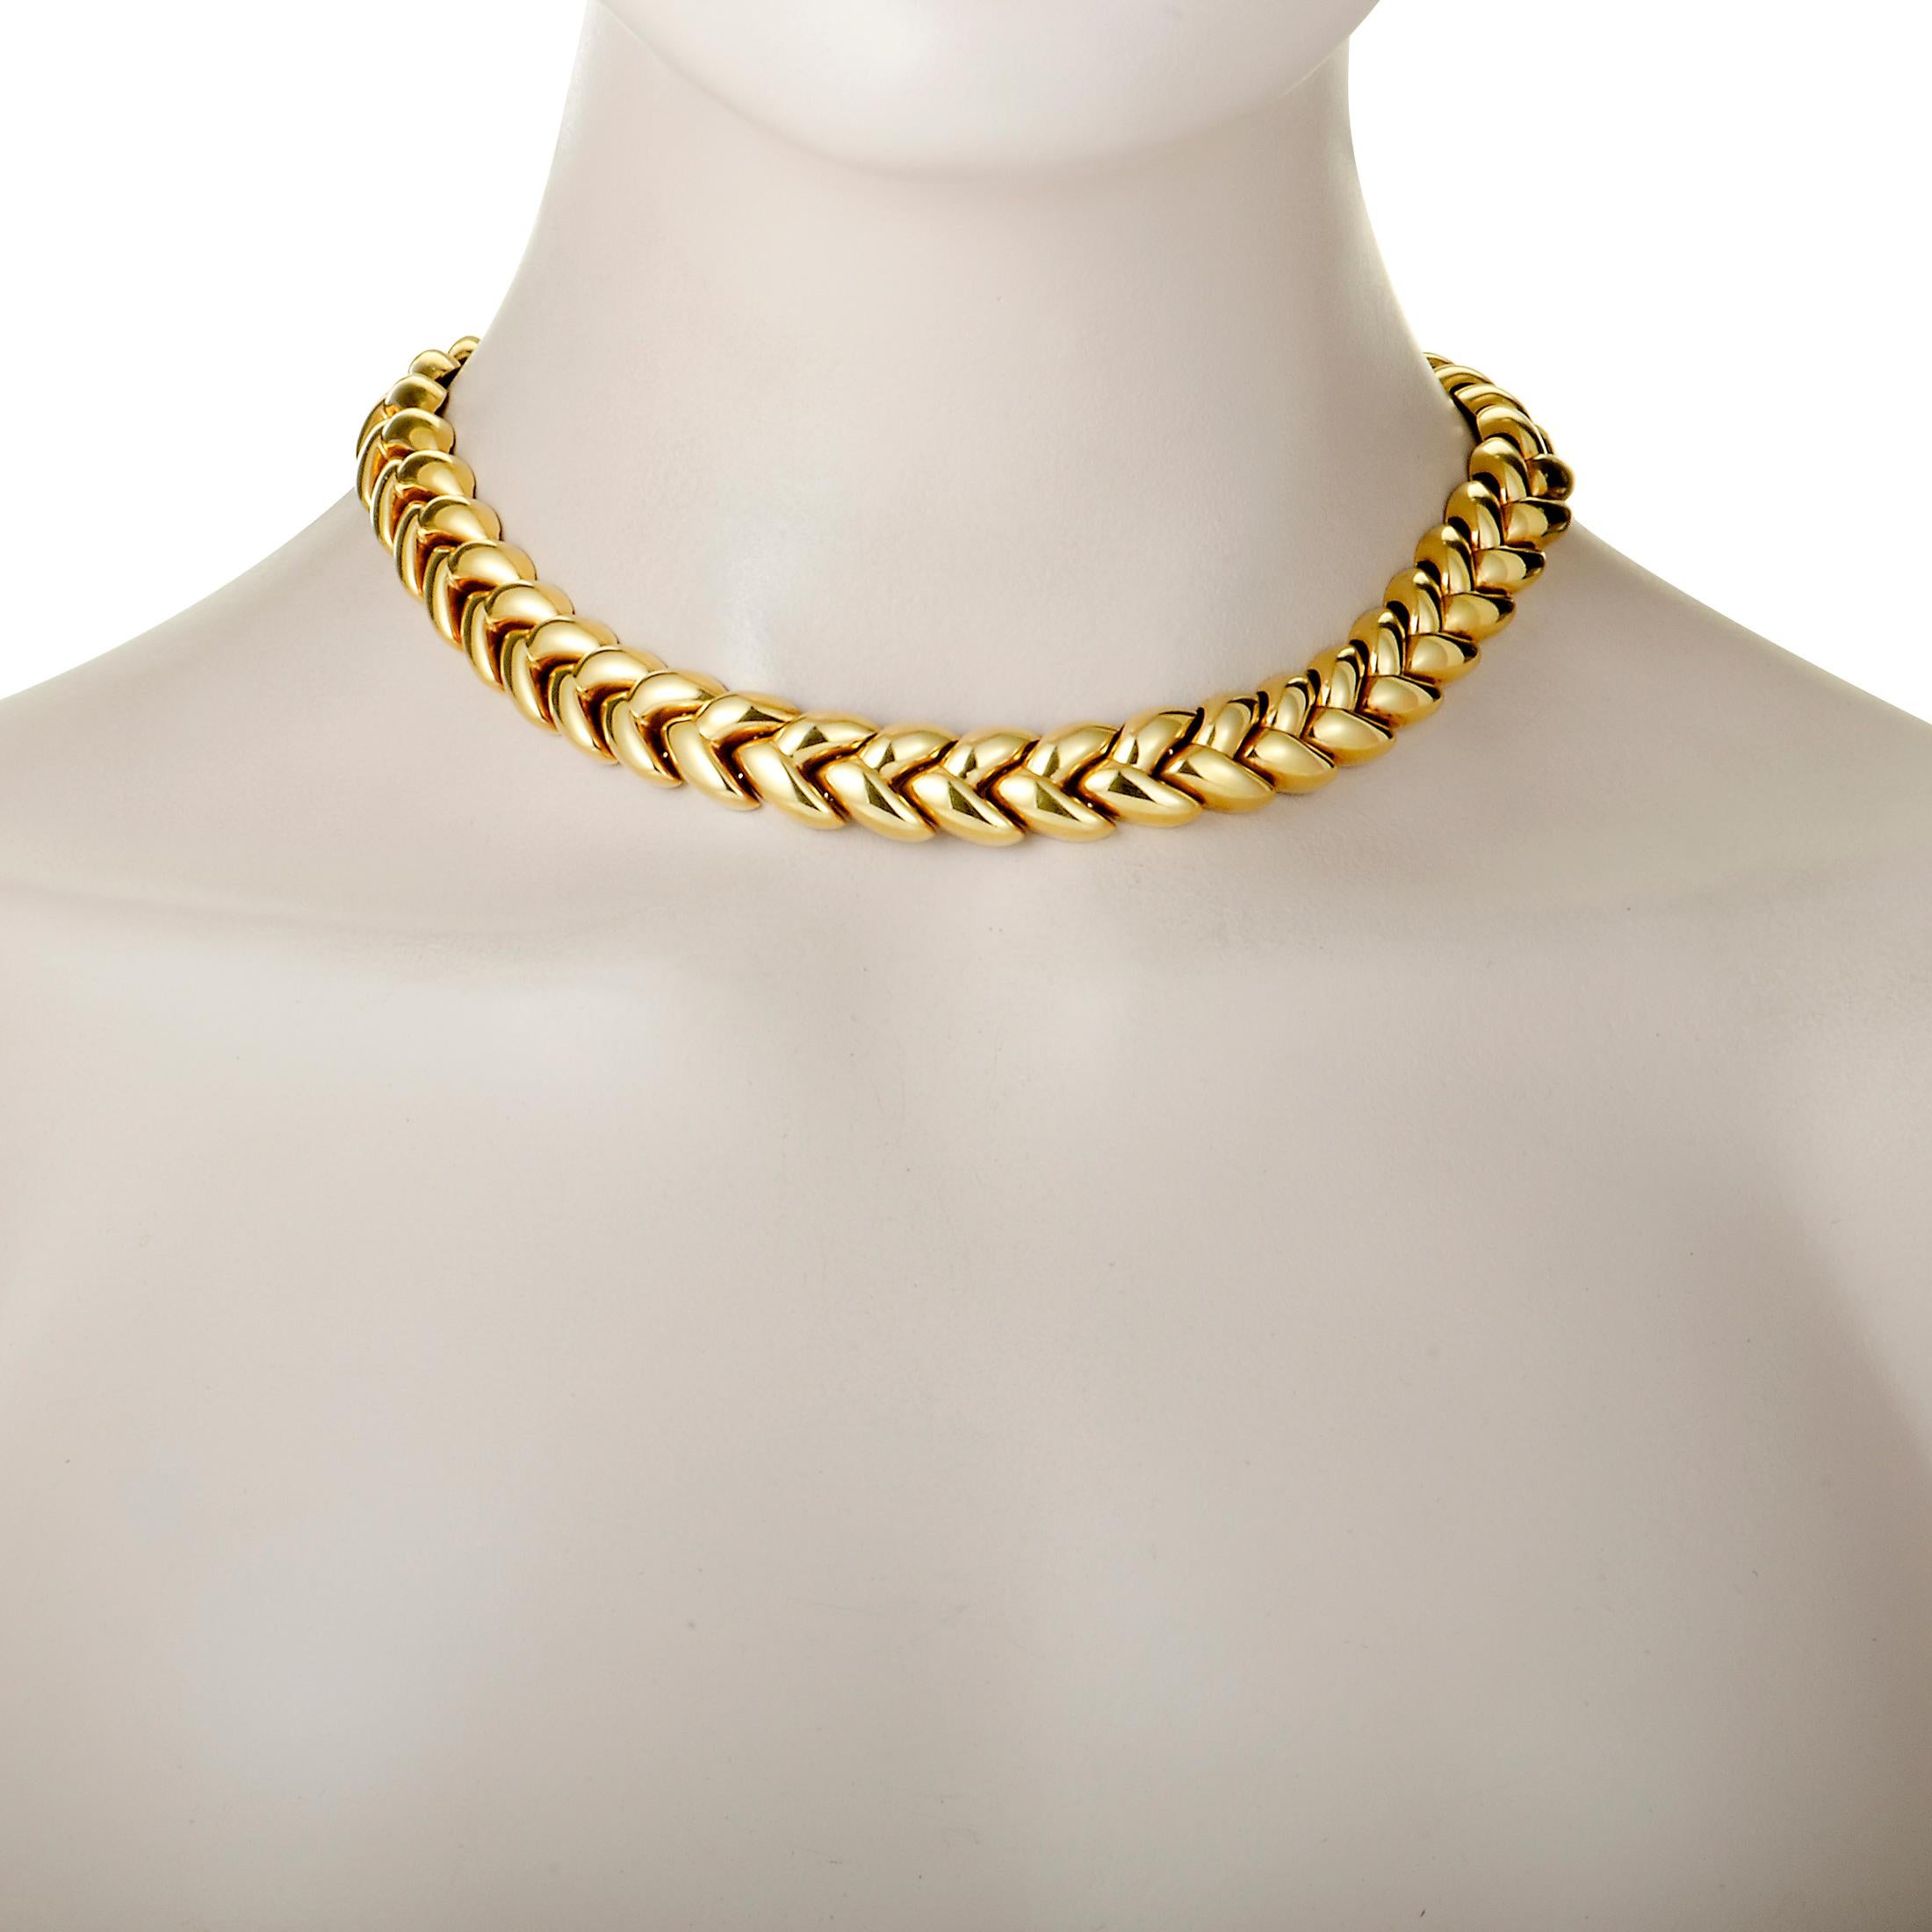 This compelling vintage piece from Cartier boasts a stunningly intricate design and offers an incredibly prestigious look that will add a luxe touch to your ensembles. The necklace is masterfully crafted from 18K yellow gold and it weighs 121.6